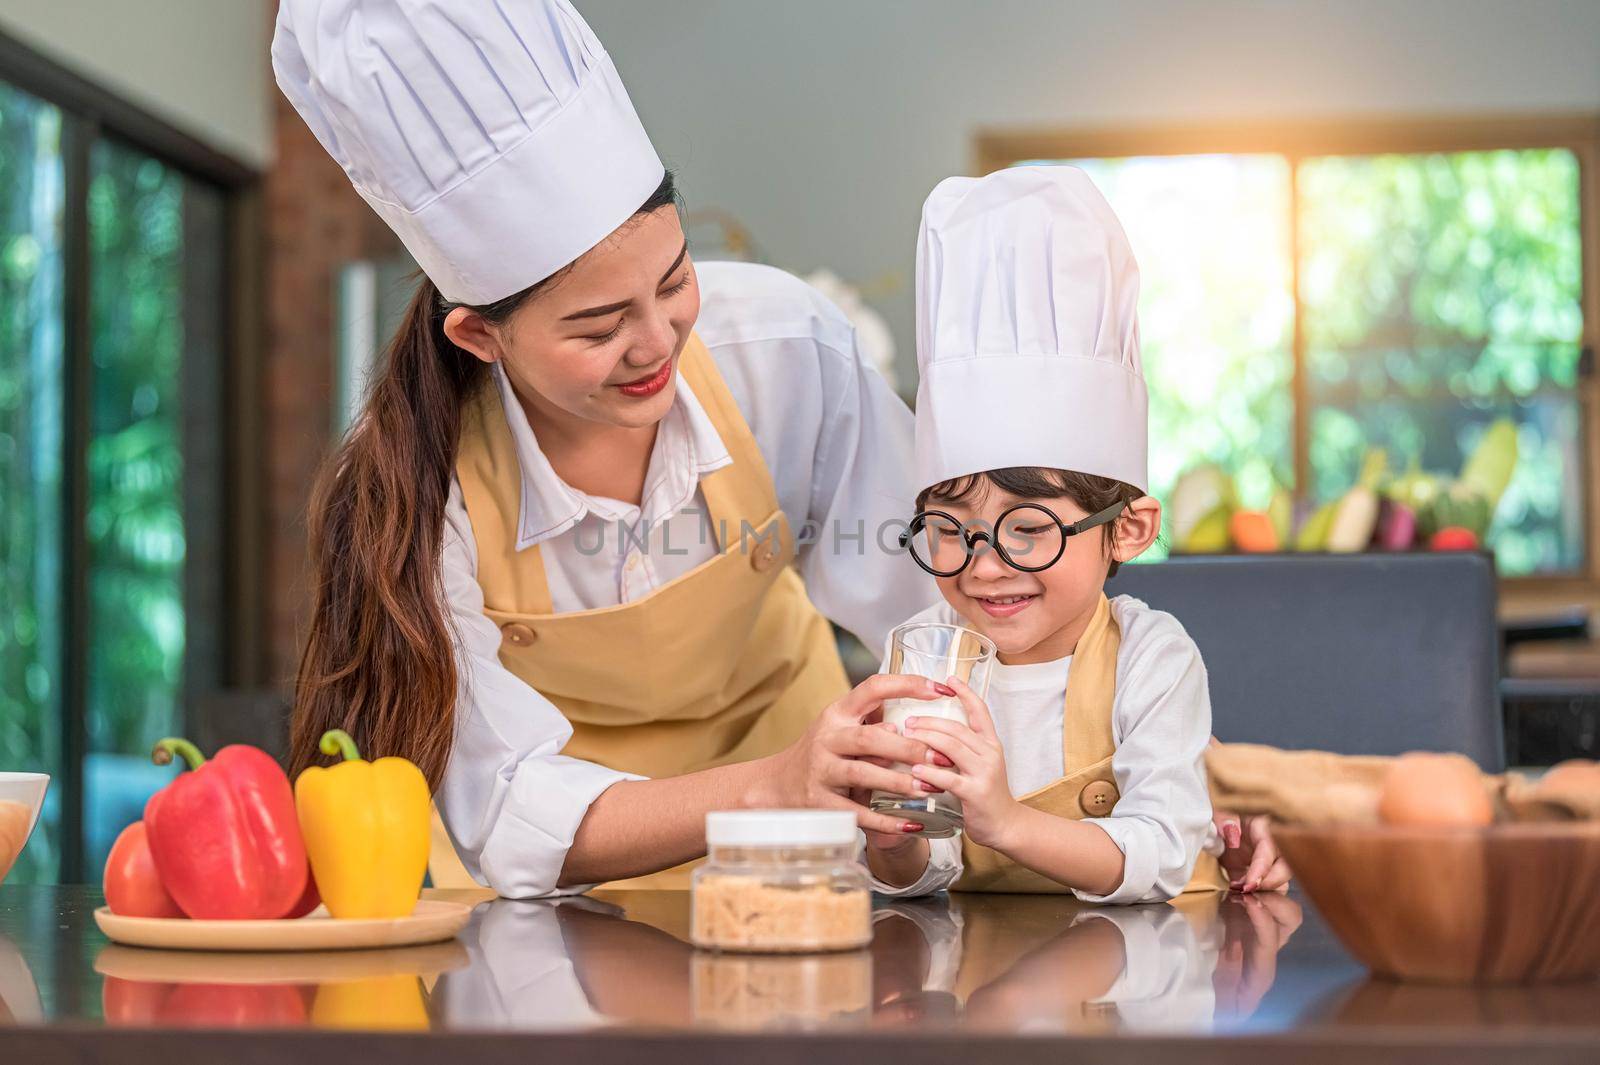 Asian mother helping cute little boy drinking milk in glass at home kitchen in chef cooking uniform. People lifestyles and Happy family togetherness concept. Calcium and protein in milk nutrition